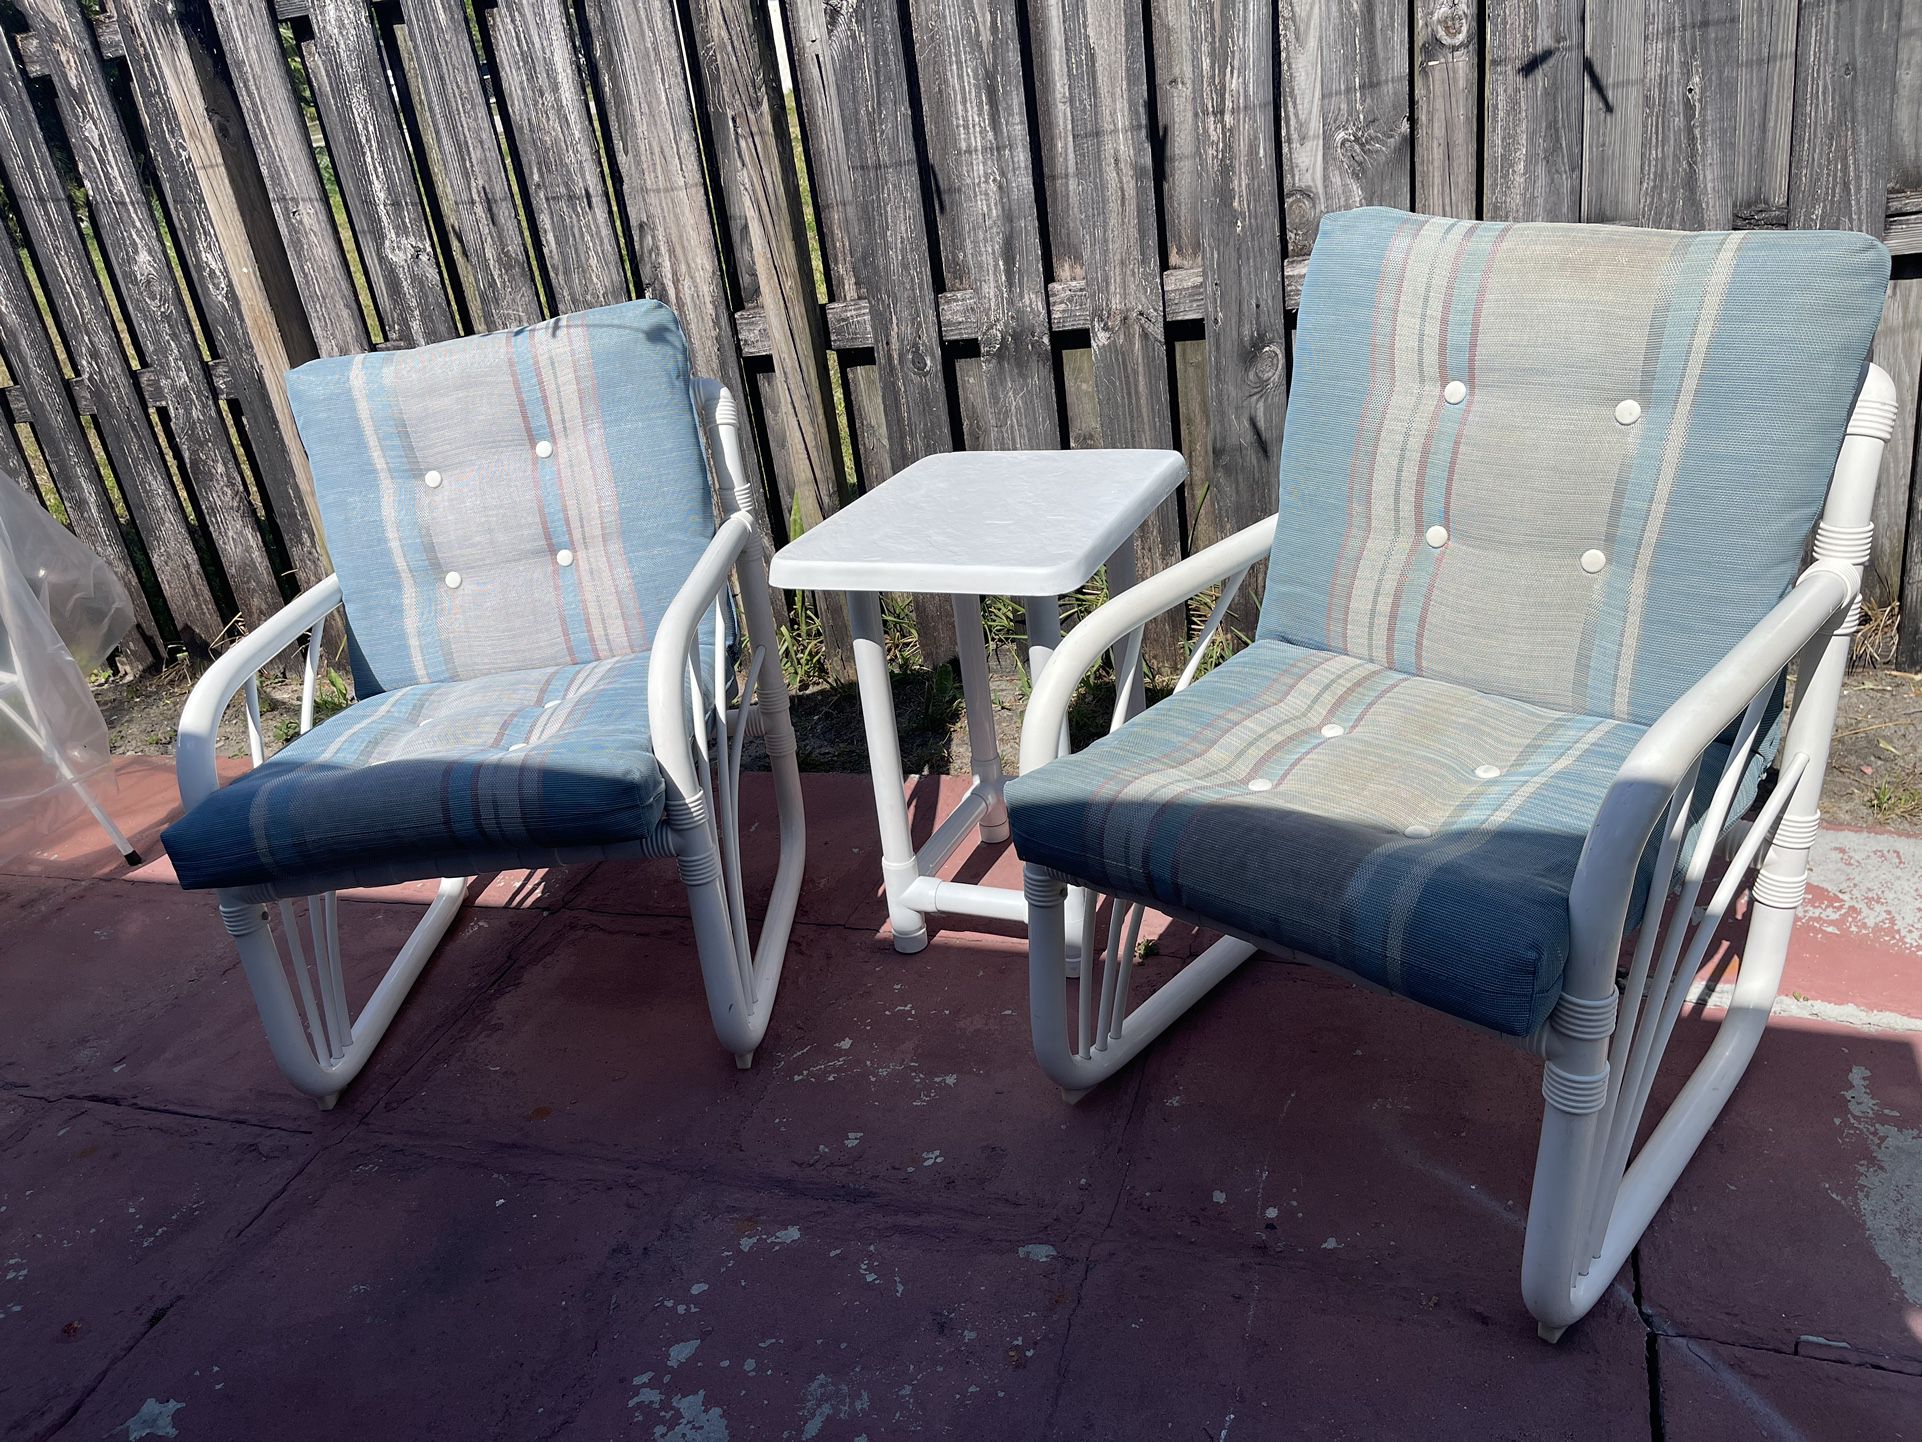 PVC Patio Furniture Used But In Good Condition $60 Firm On Price